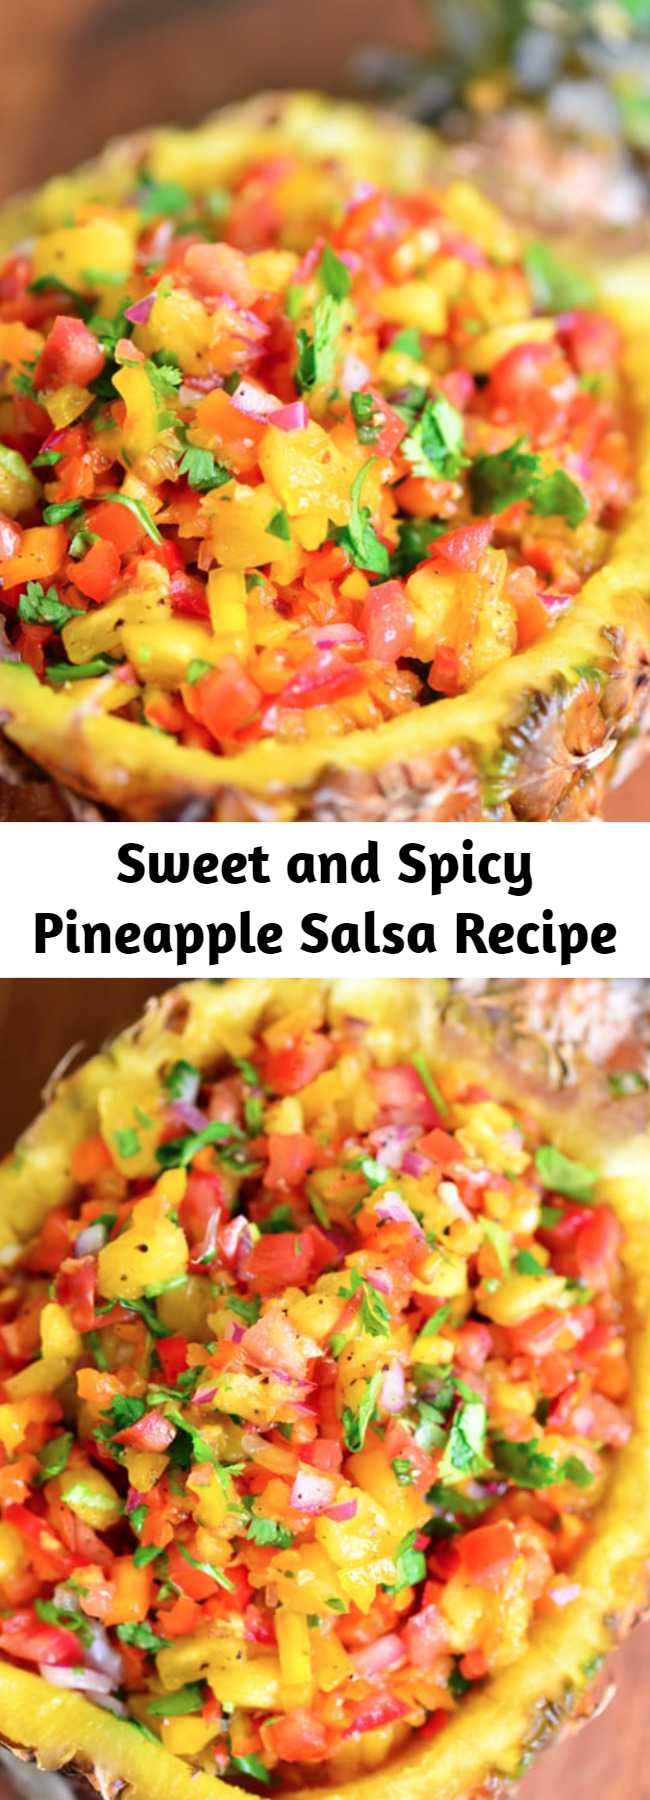 Sweet and Spicy Pineapple Salsa Recipe - This pineapple salsa recipe has a delicious combination of sweet and spicy. It can be served with grilled chicken or fish or as an appetizer with chips.